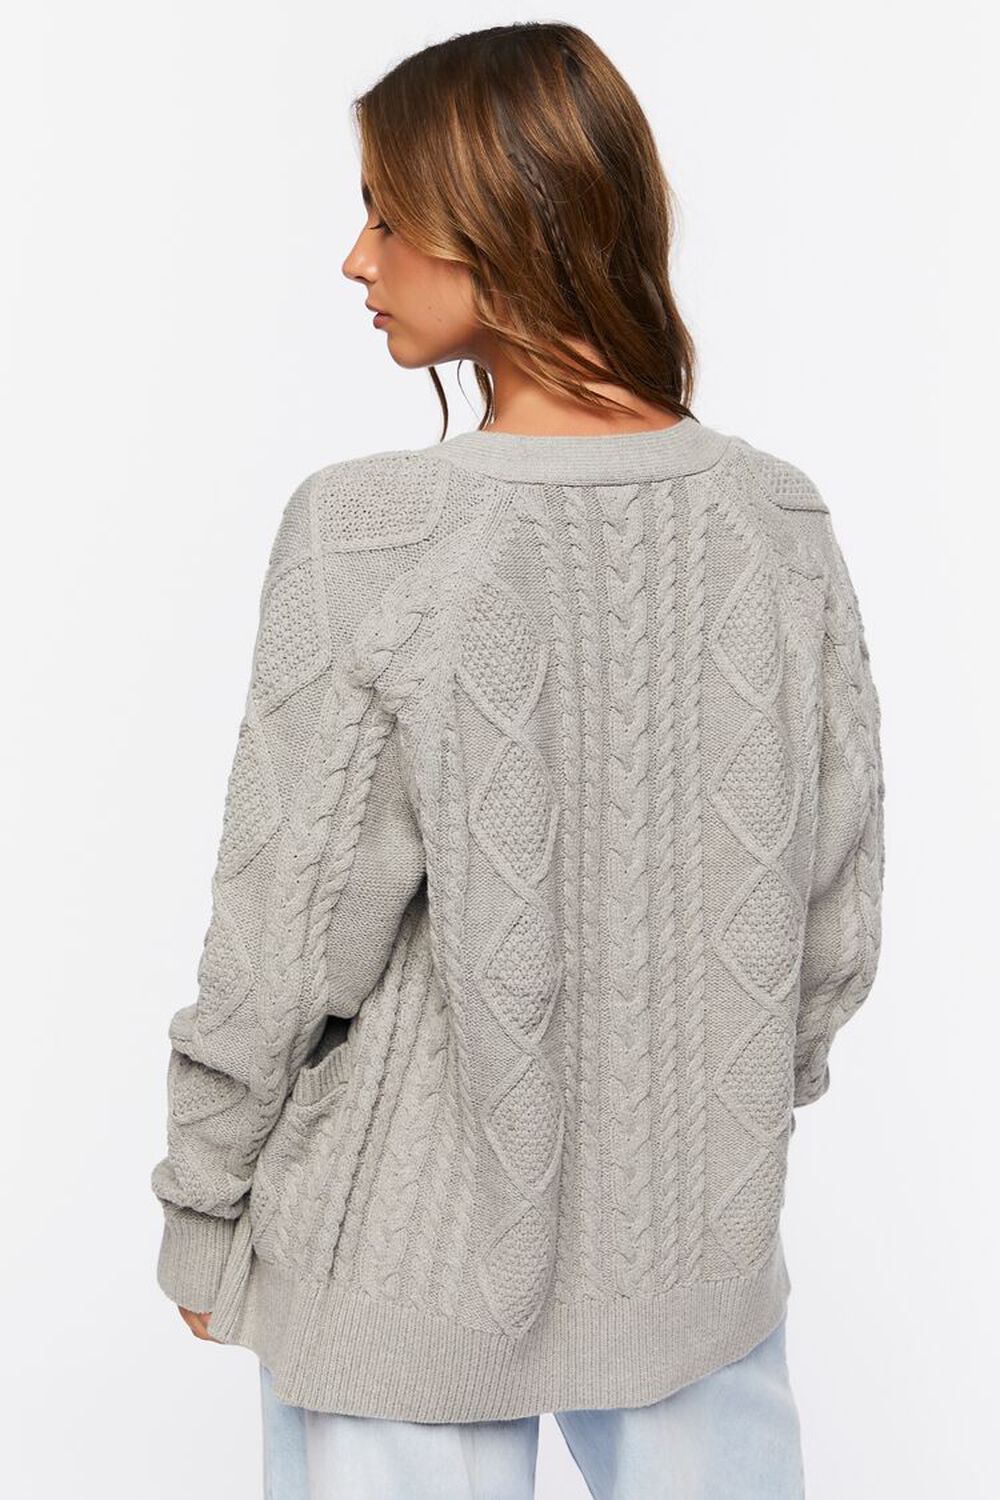 GREY Cable Knit Cardigan Sweater, image 3